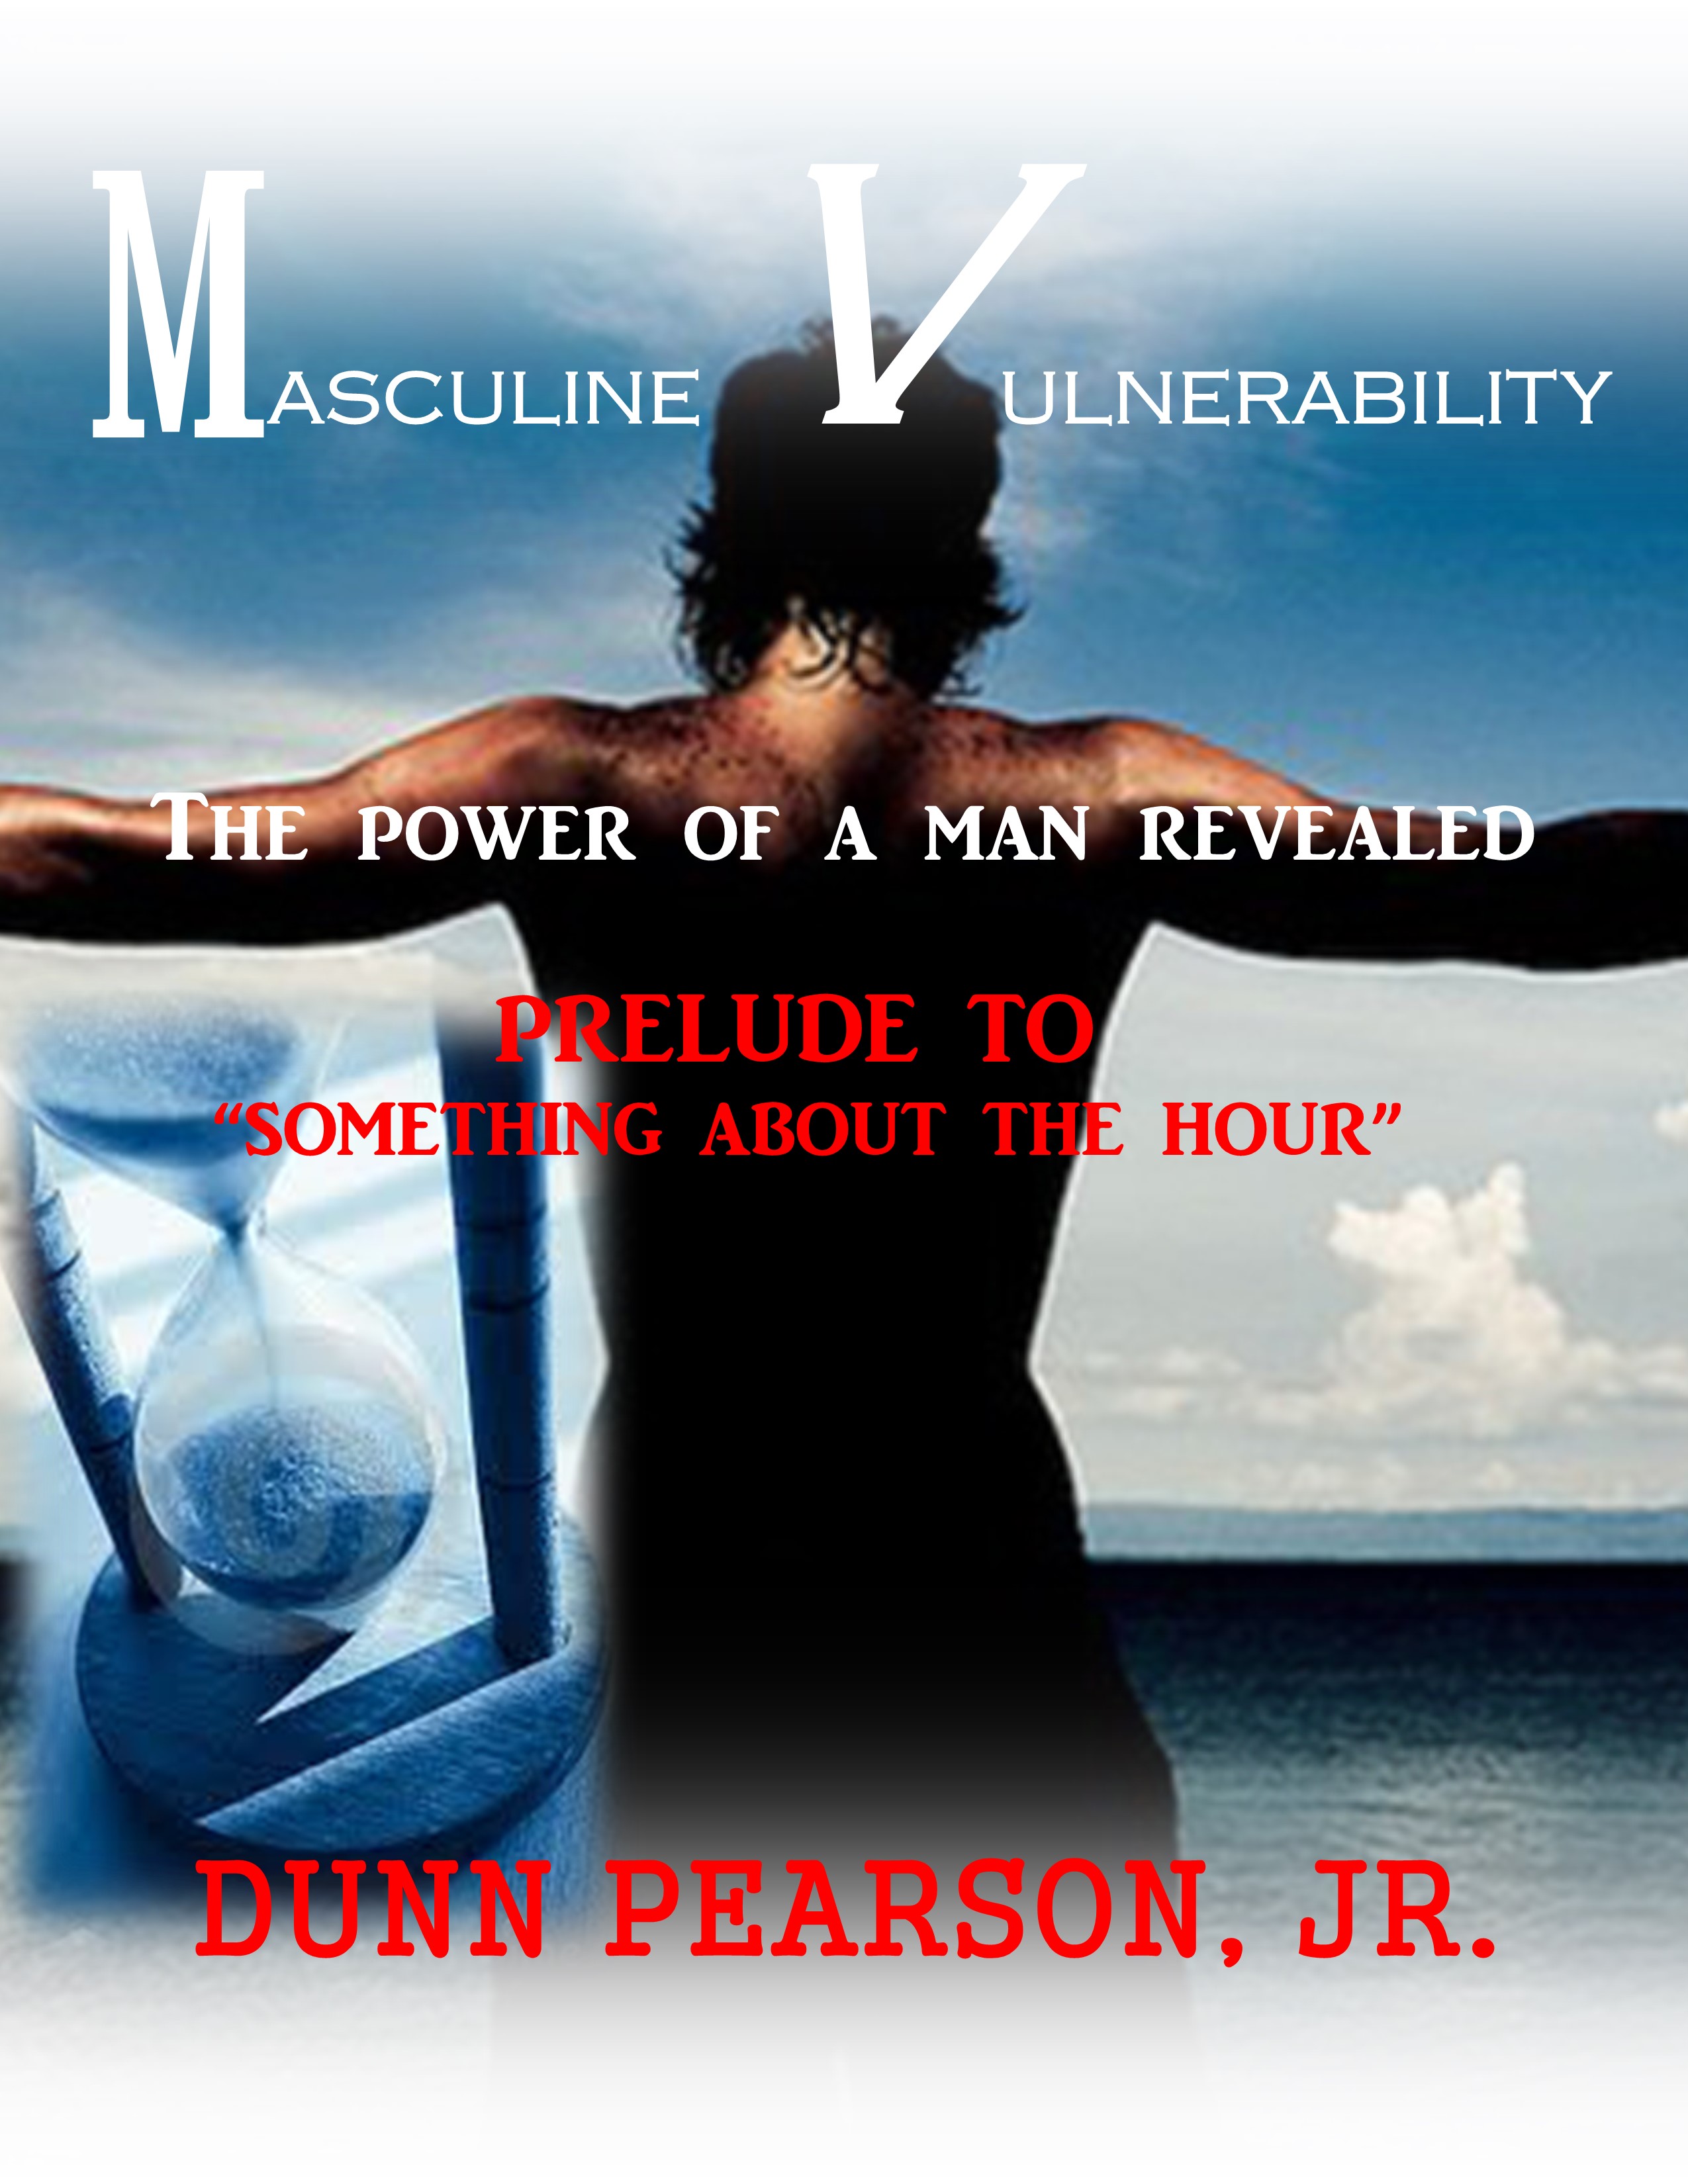 MASCULINE VULNERABILITY: the power of a man revealed